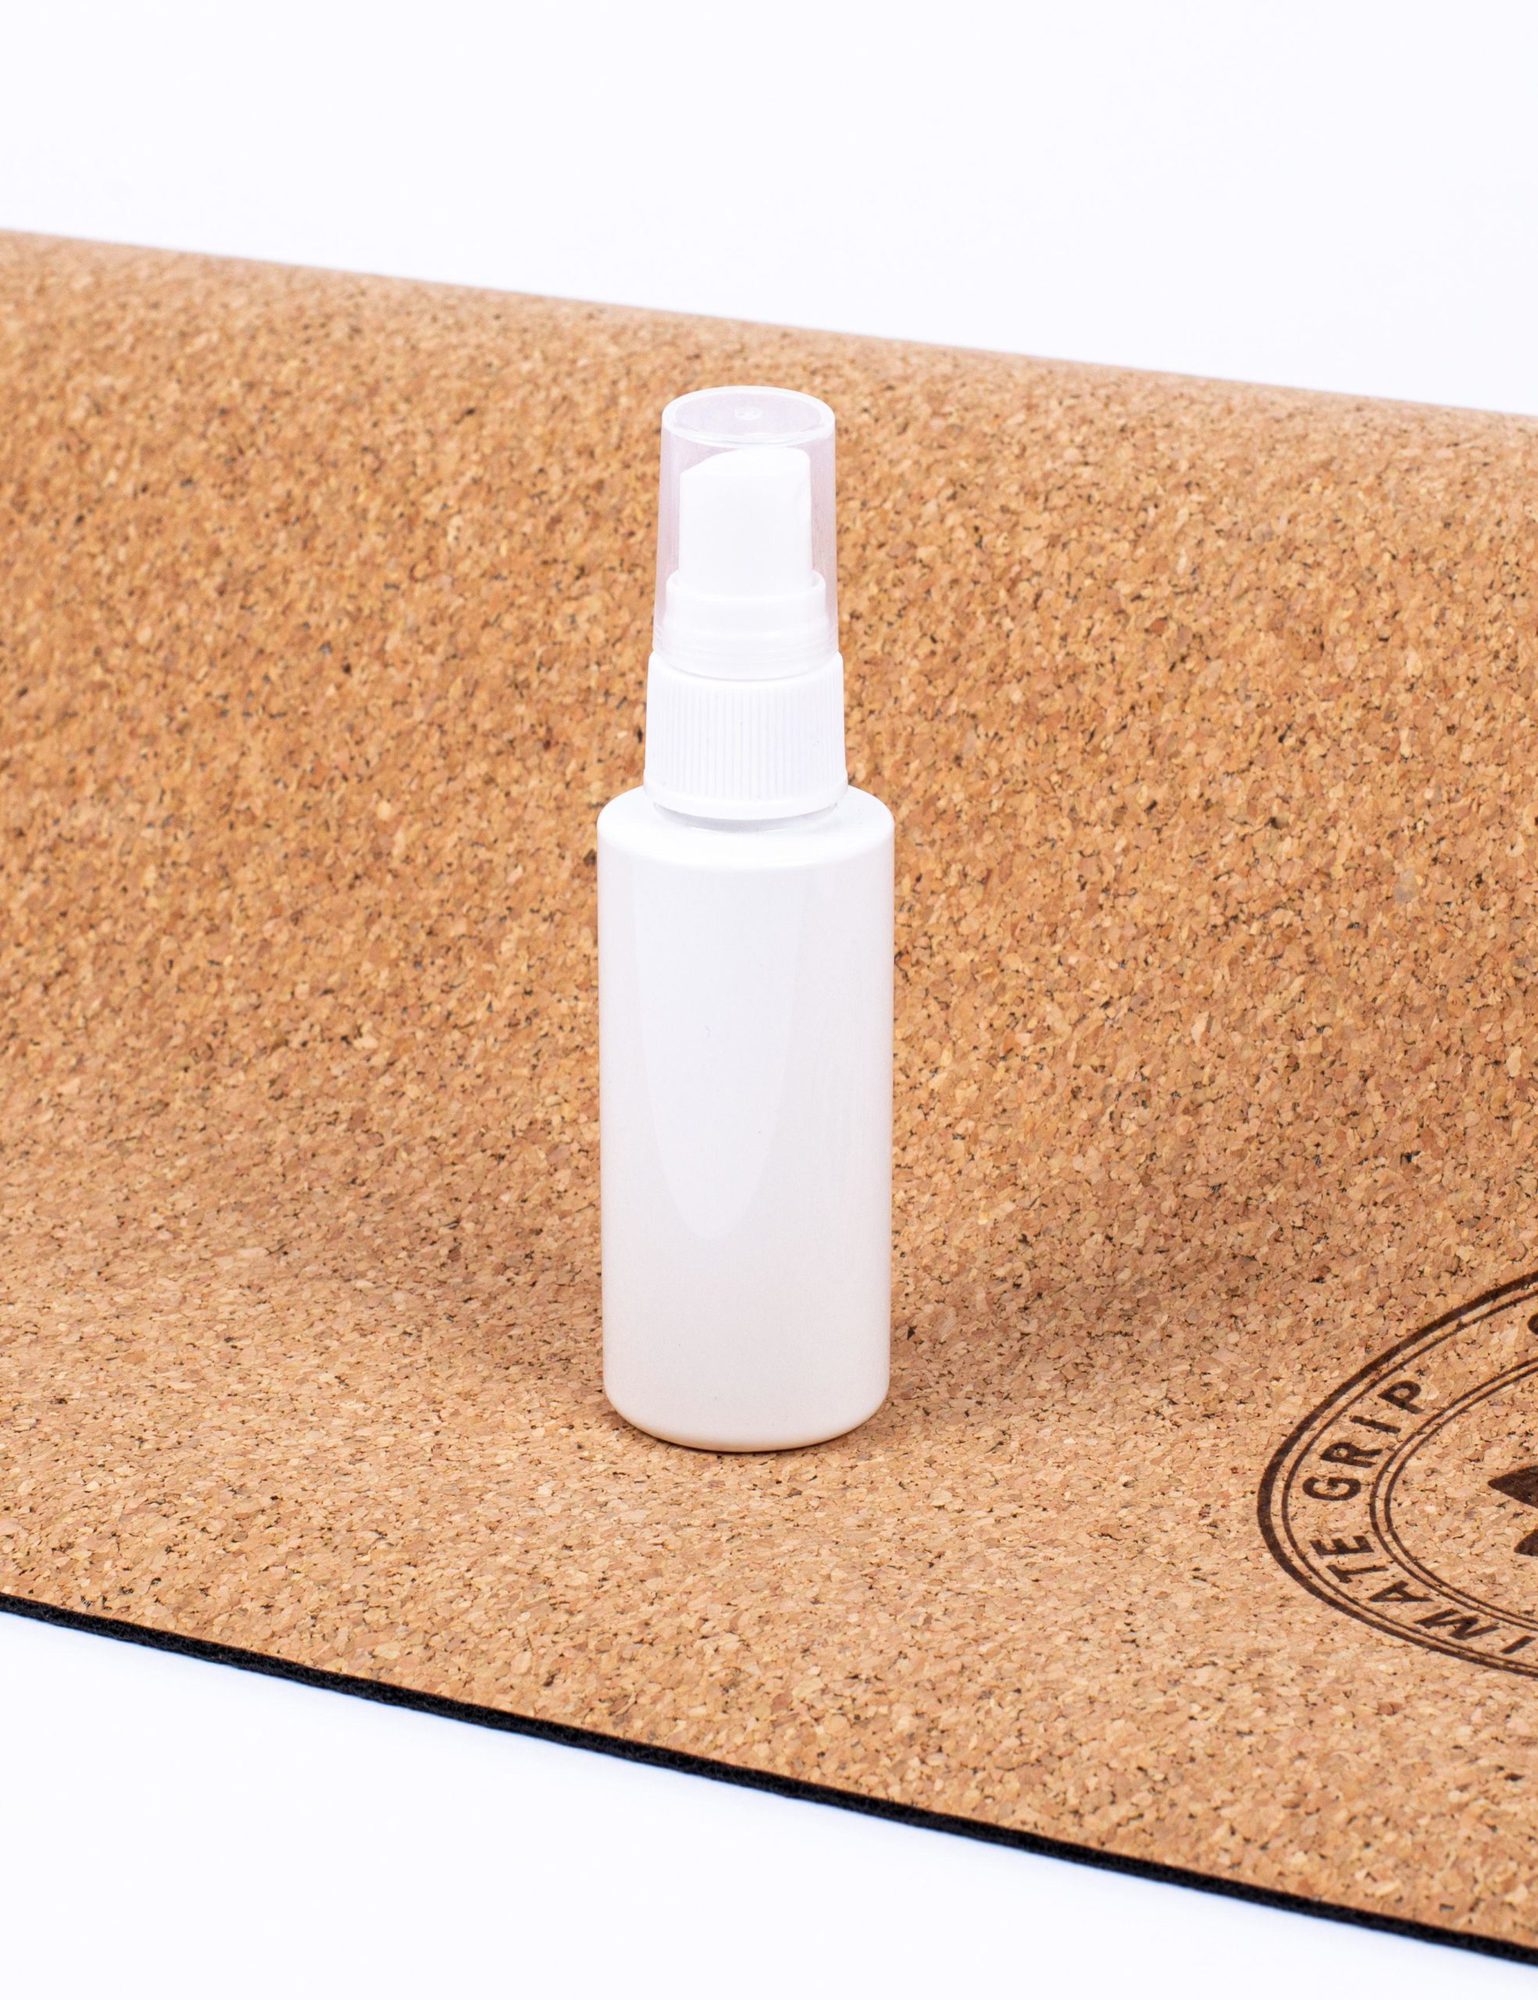 The Supported Traveler - Travel Cork Yoga Mat and Block